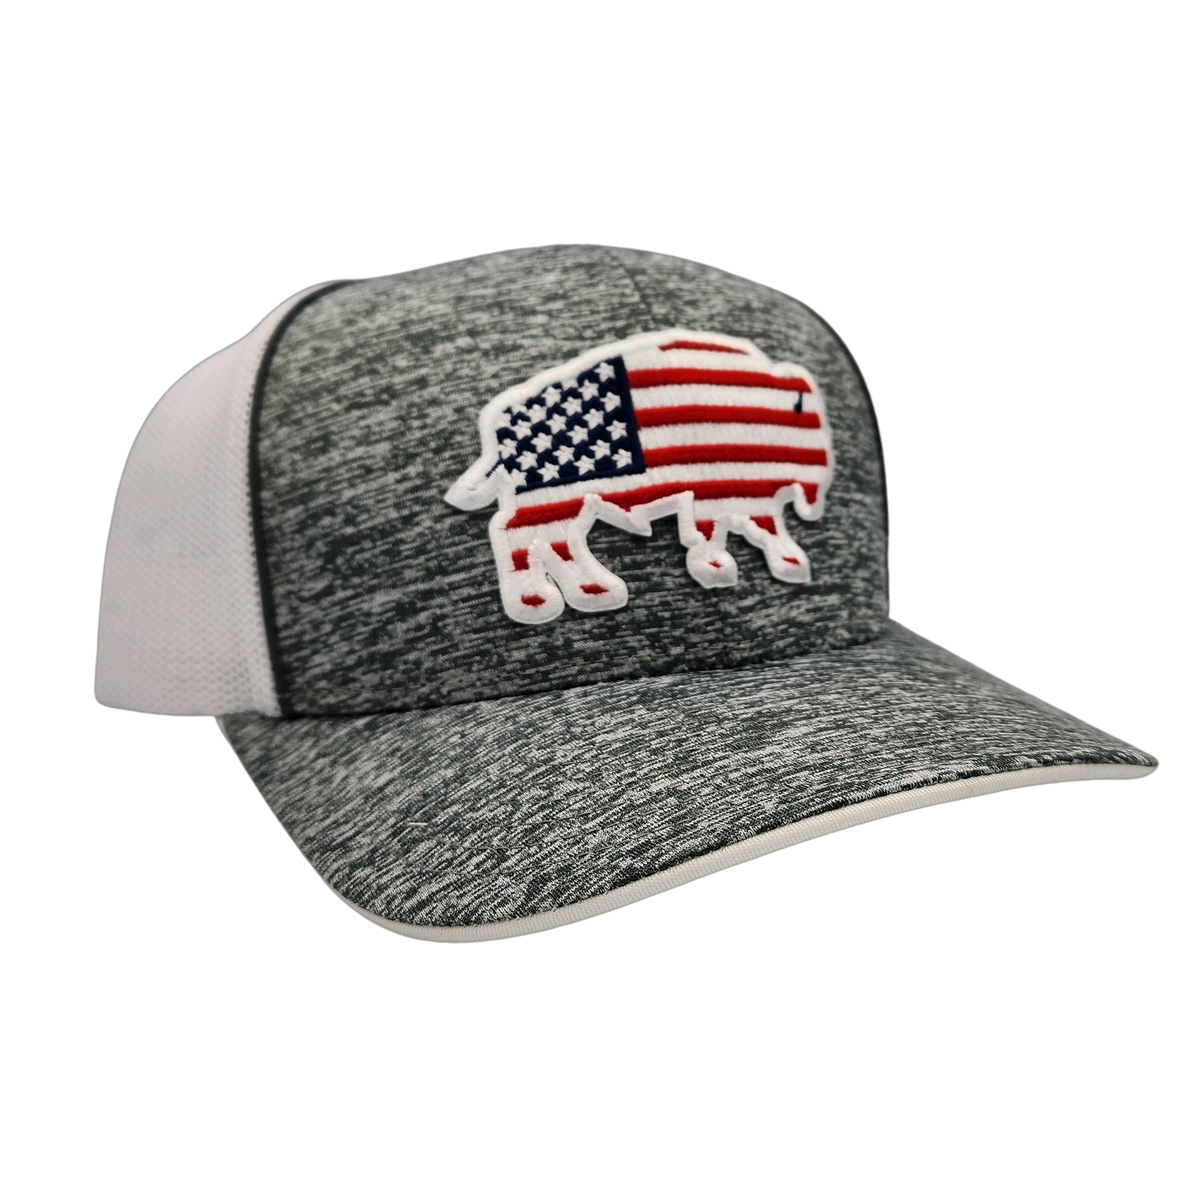 Red Dirt Hat Co. "USA Buffalo" Hat in Grey/White